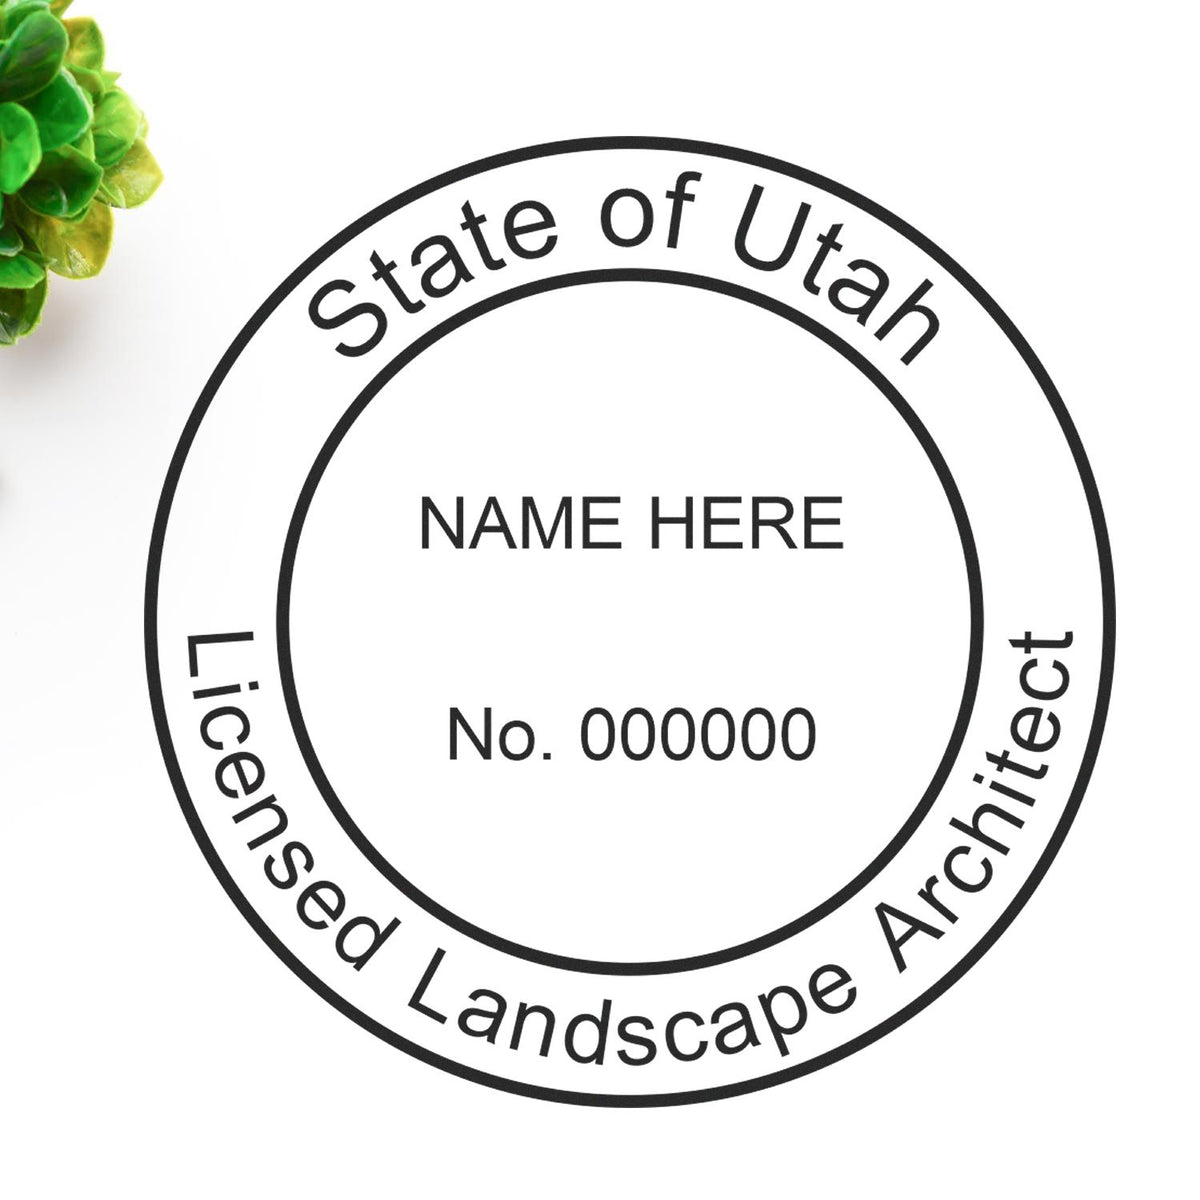 Slim Pre-Inked Utah Landscape Architect Seal Stamp in use photo showing a stamped imprint of the Slim Pre-Inked Utah Landscape Architect Seal Stamp